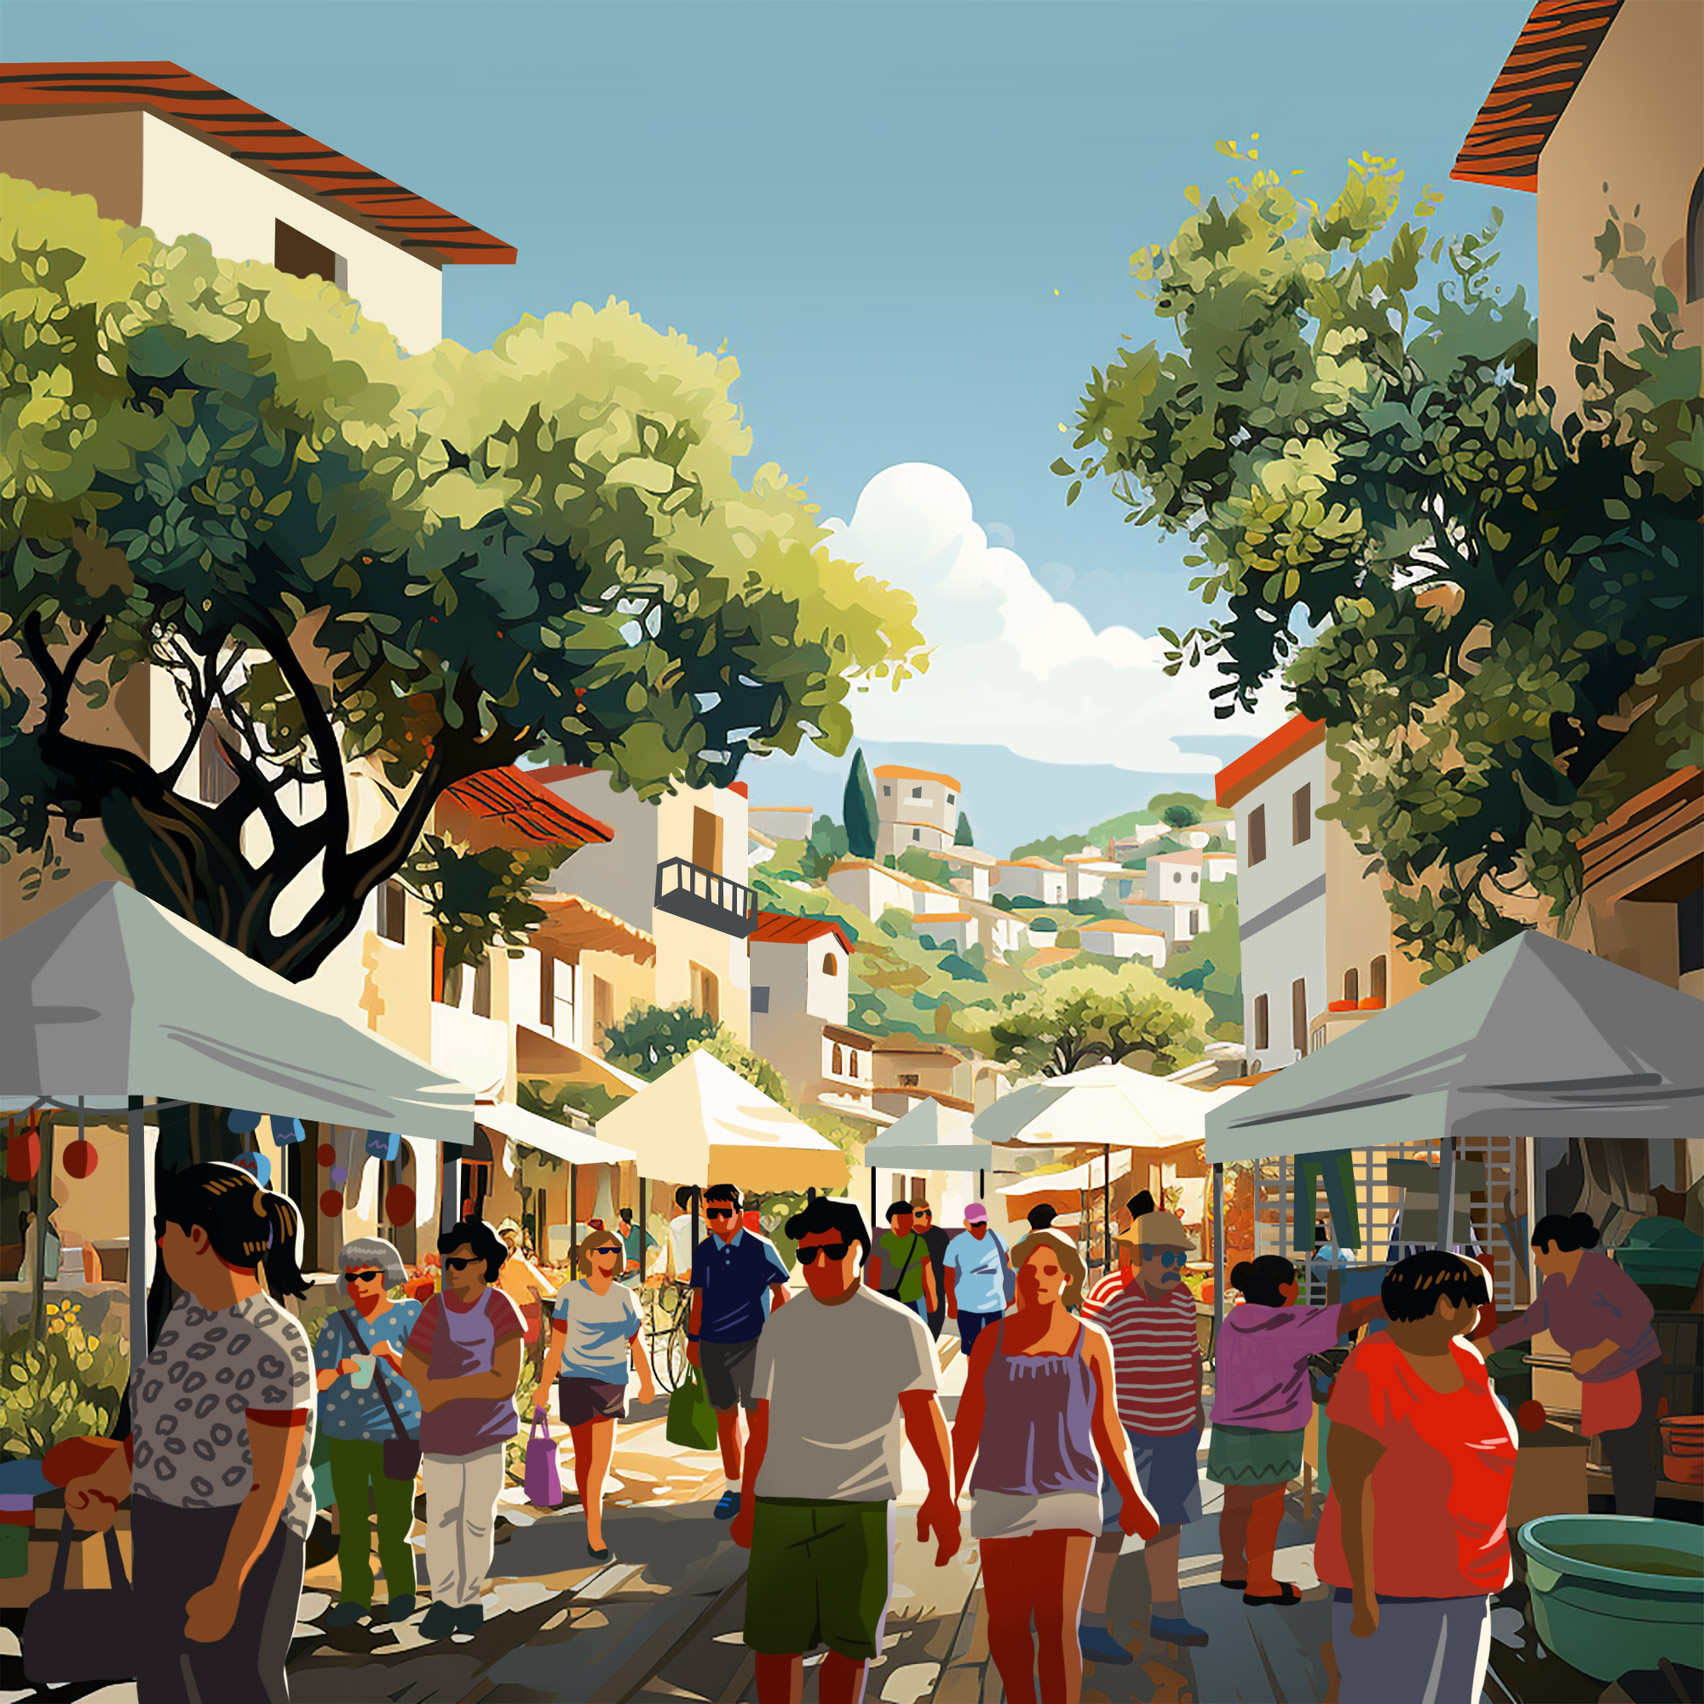 Illustration of a Mediterranean-style town